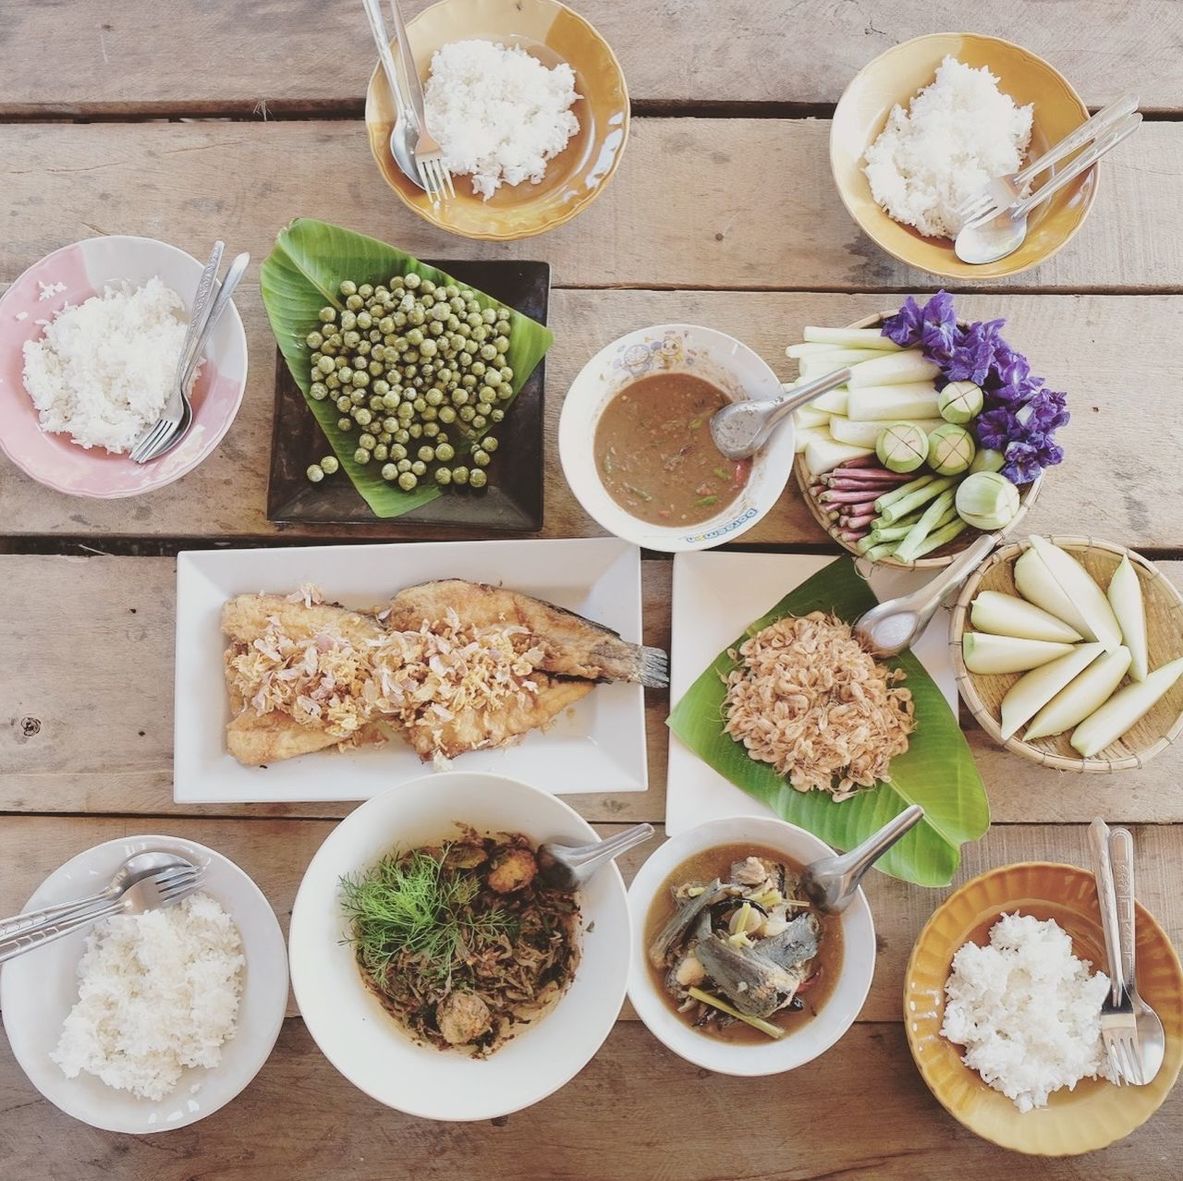 HIGH ANGLE VIEW OF VARIOUS VEGETABLES ON TABLE